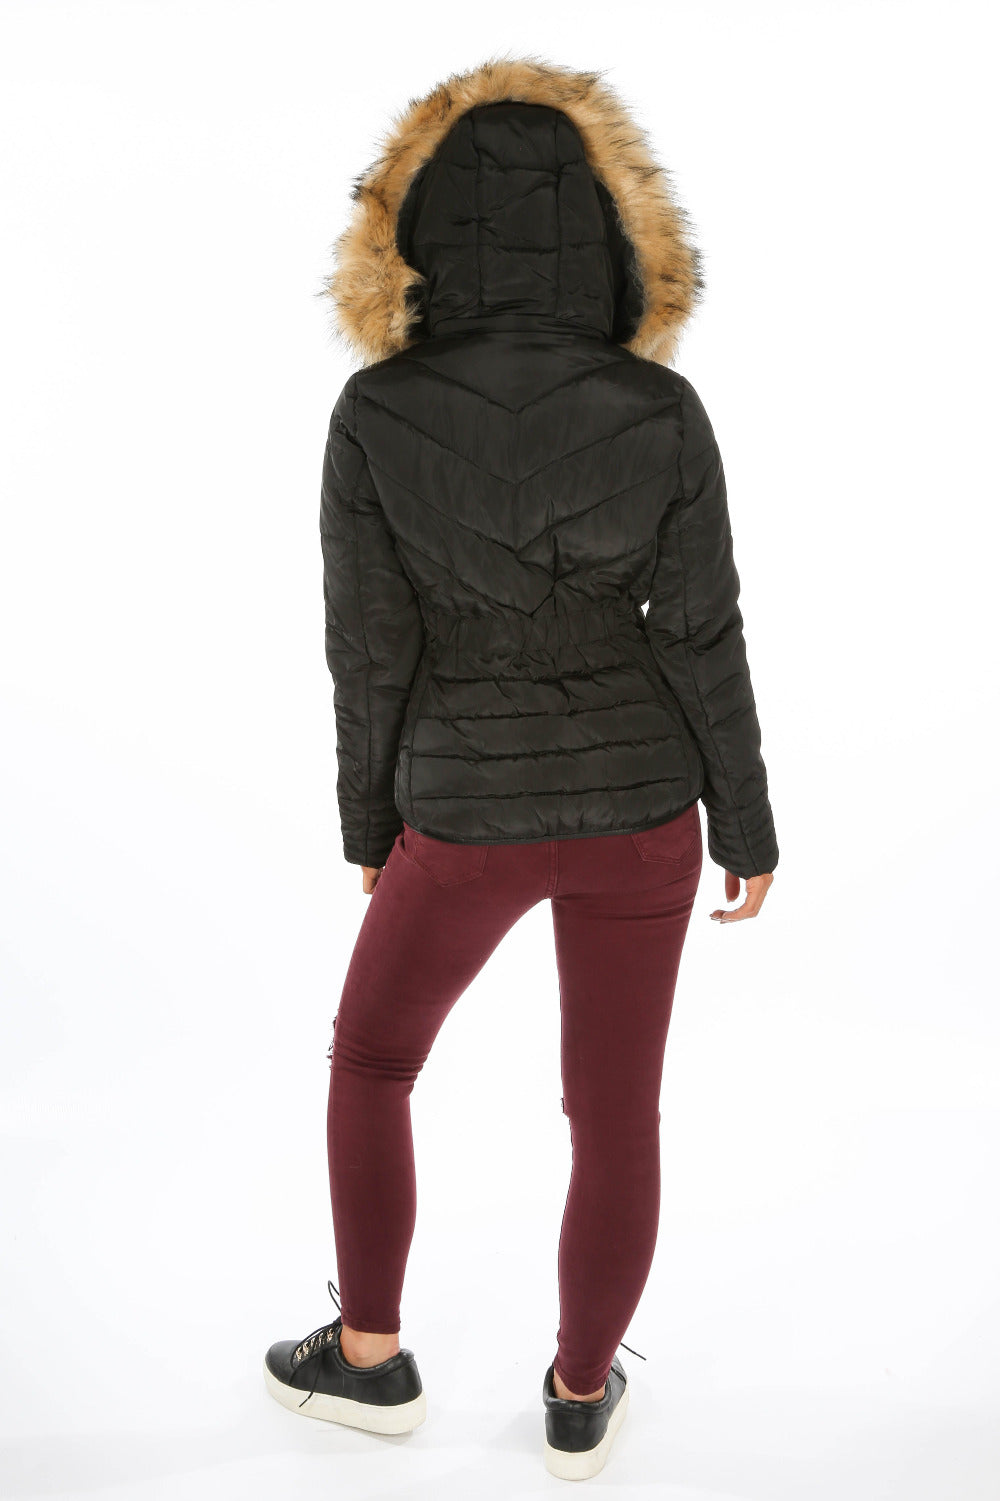 Black Quilted Puffer Jacket With Faux Fur Trim